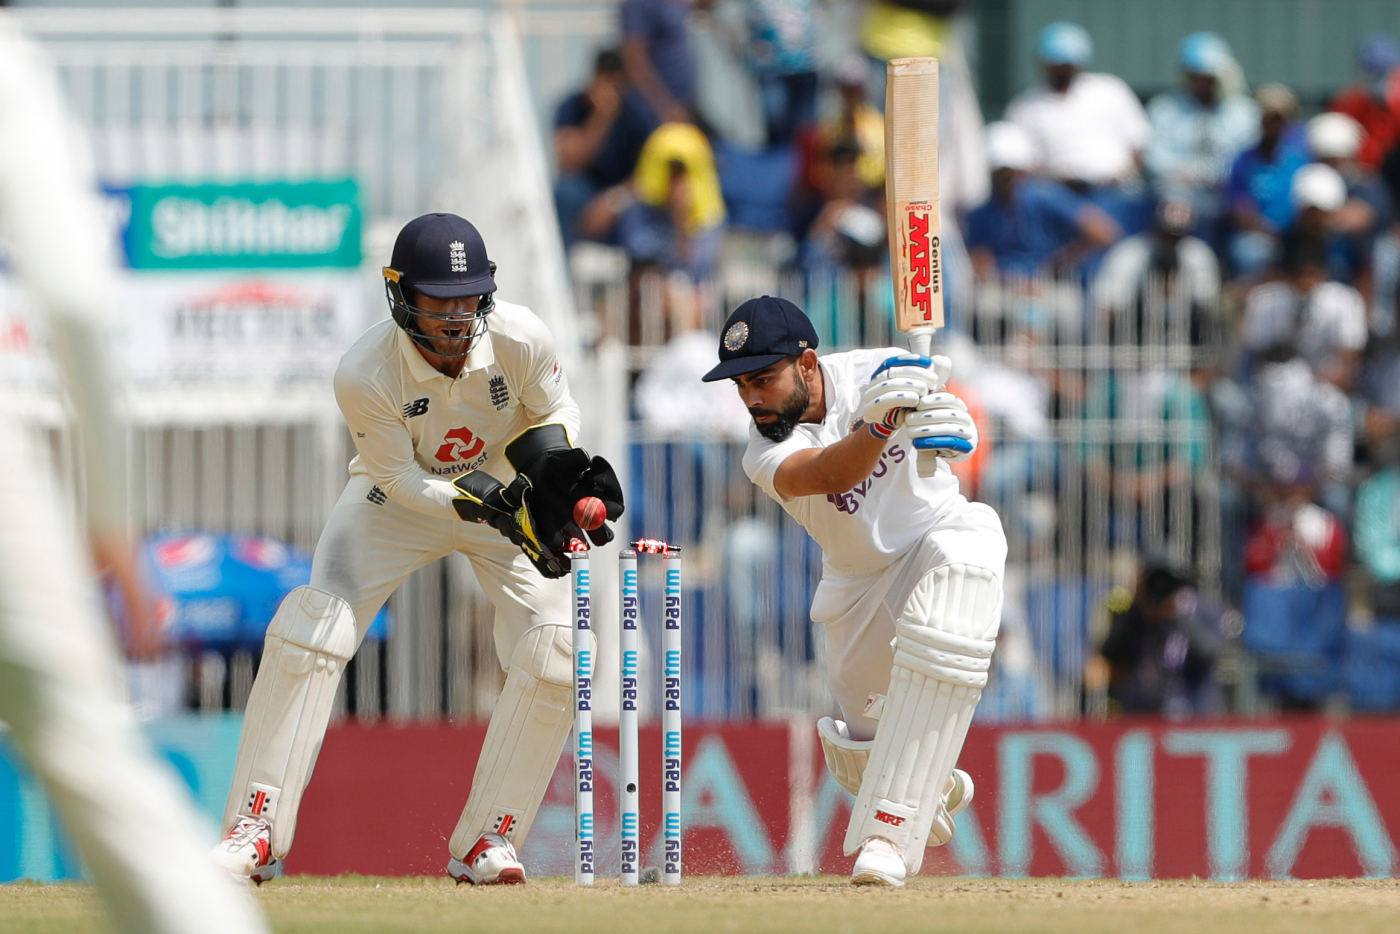 Virat Kohli was dismissed for a duck on Day 1 in Chennai | BCCI